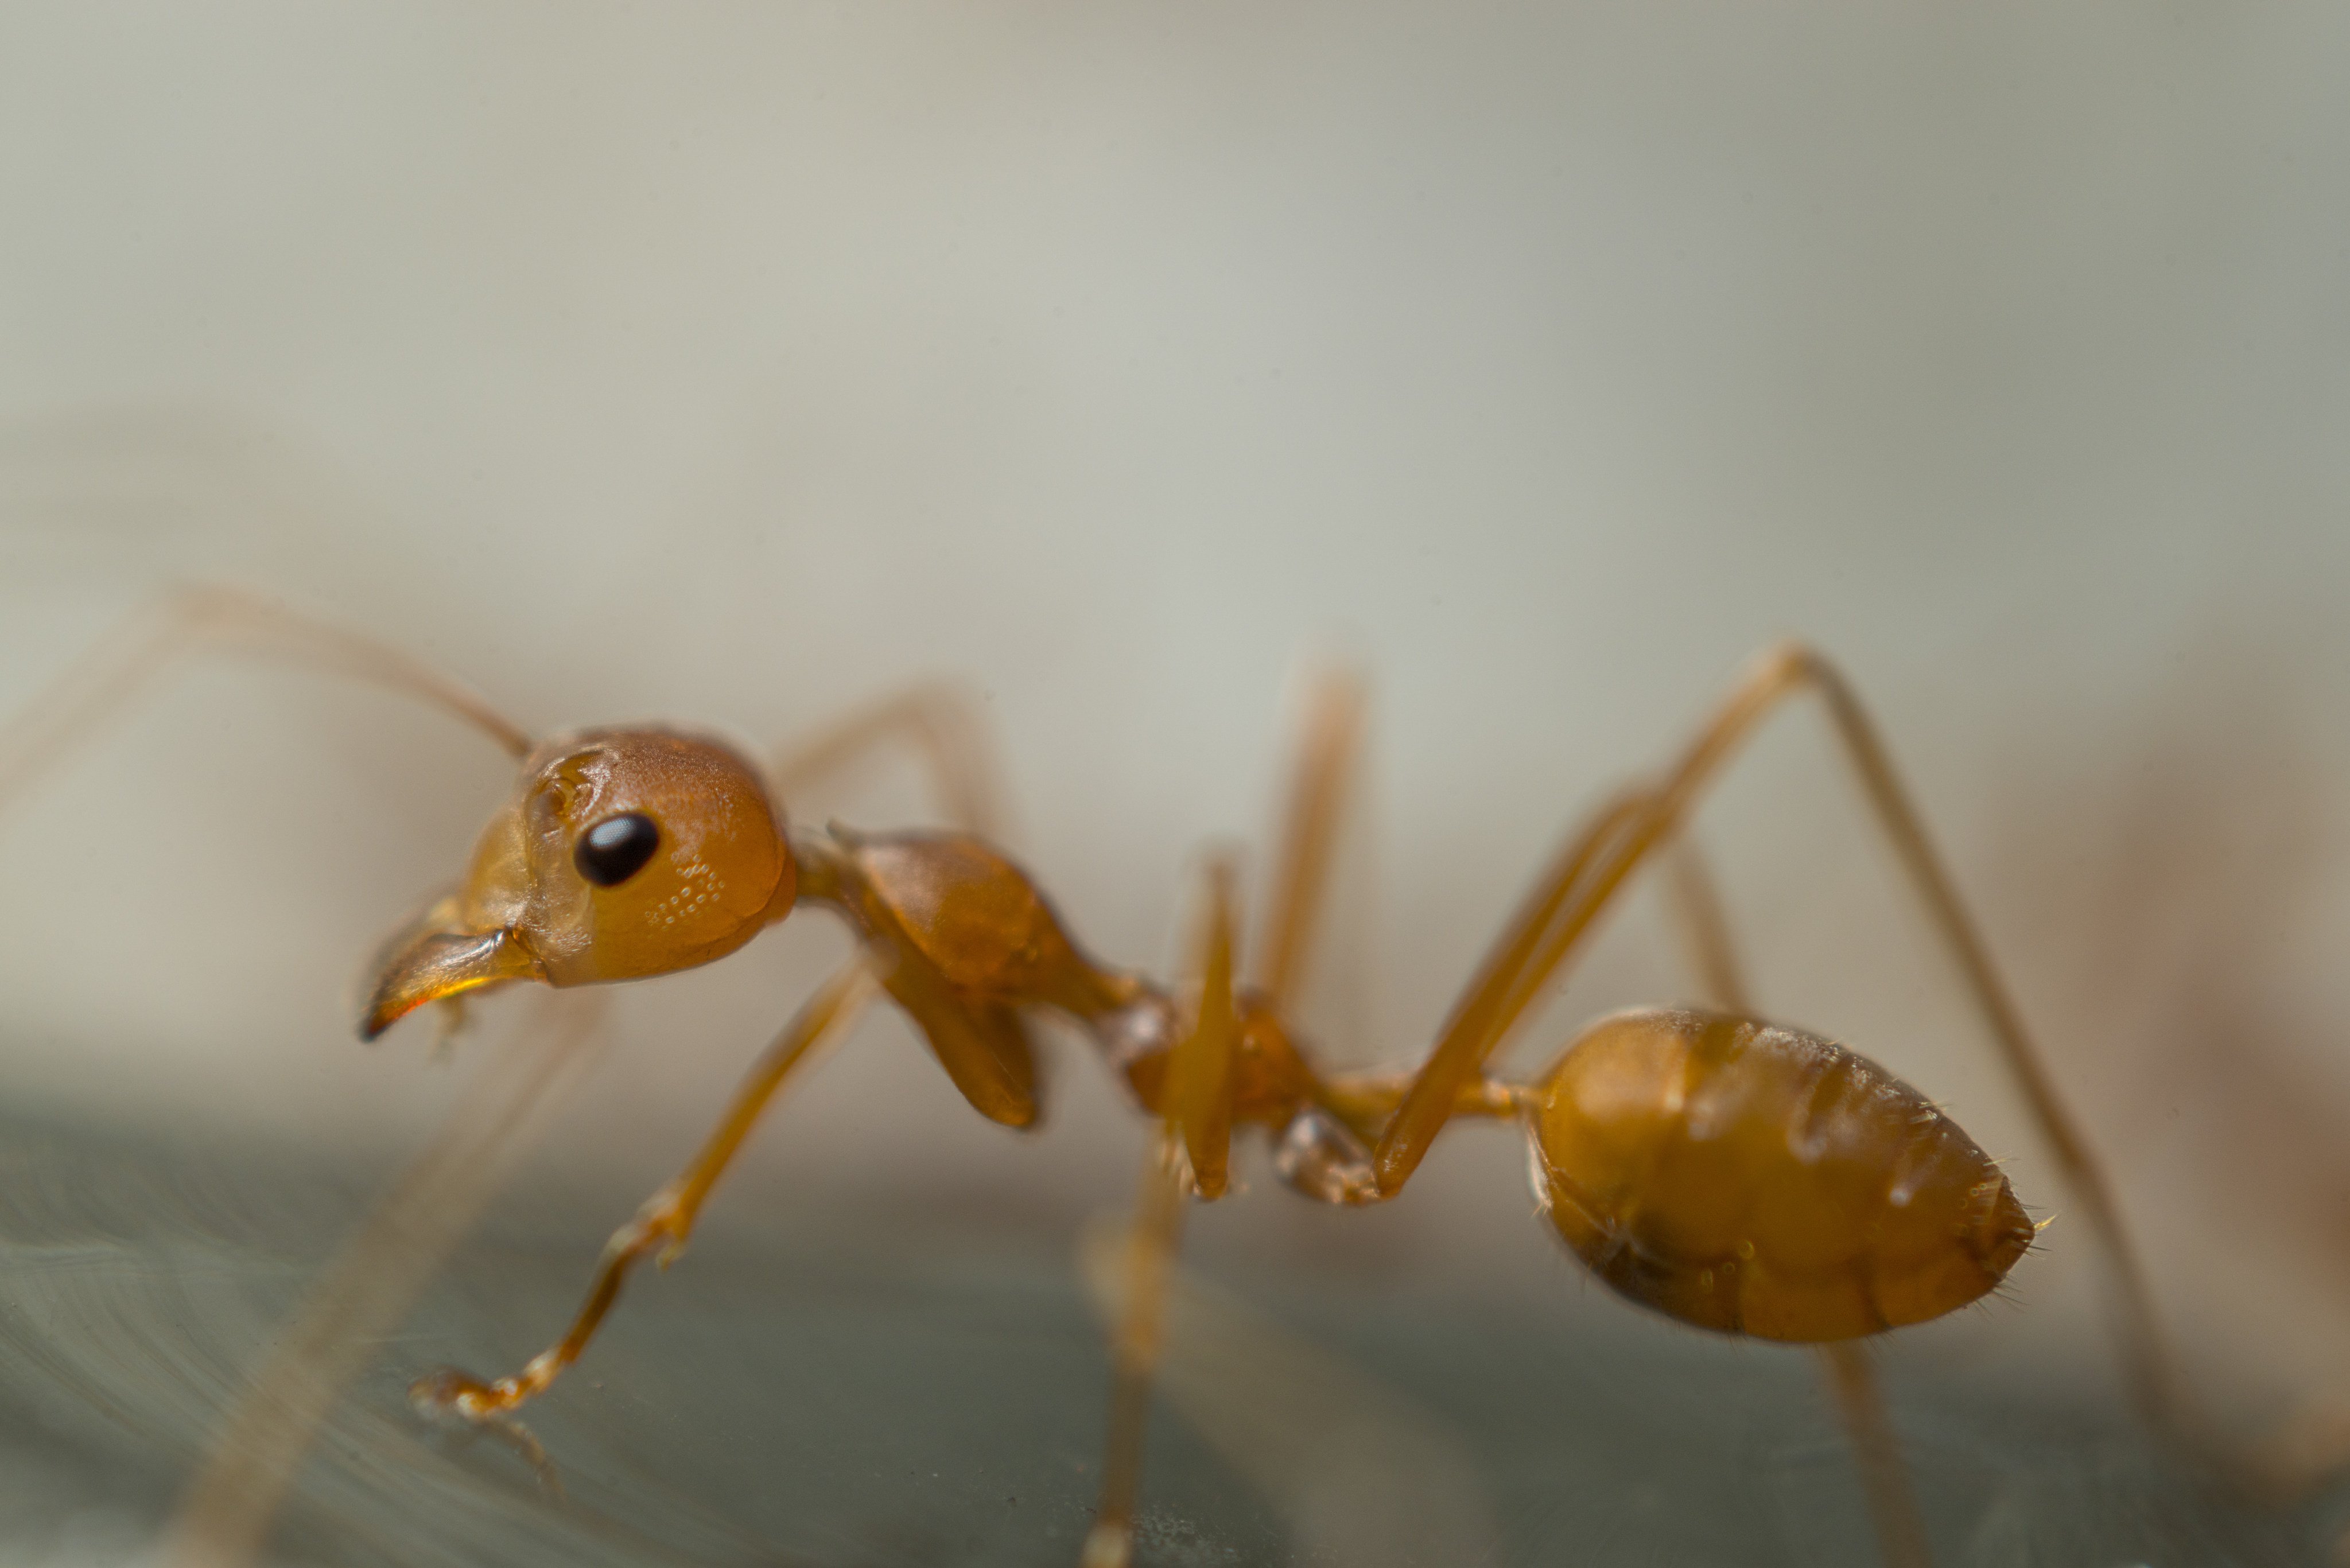 A weaver ant, a species of ant that is found in tropical Asia and Australia, taken in 2014. Photo: Antony Dickson